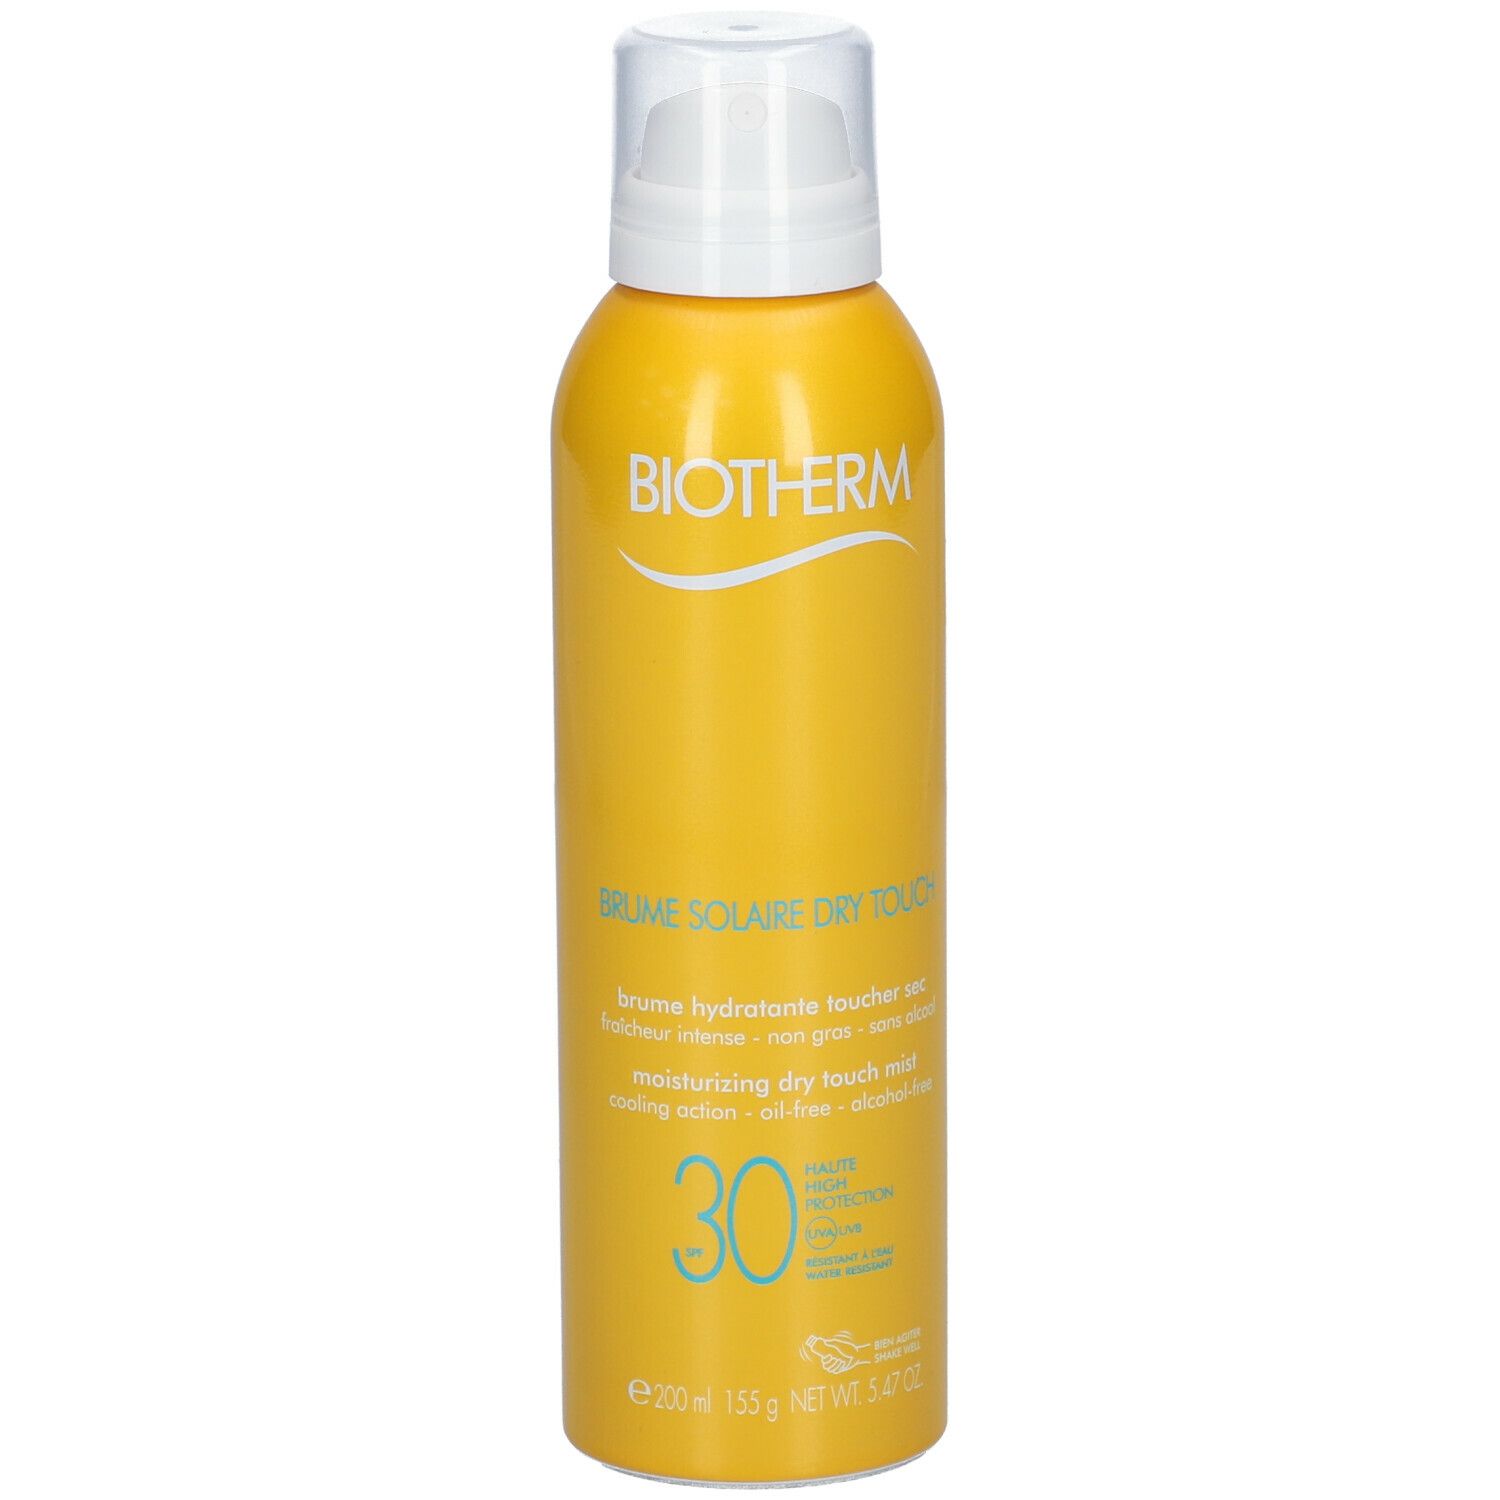 Biotherm Brume Solaire Dry Touch SPF 30